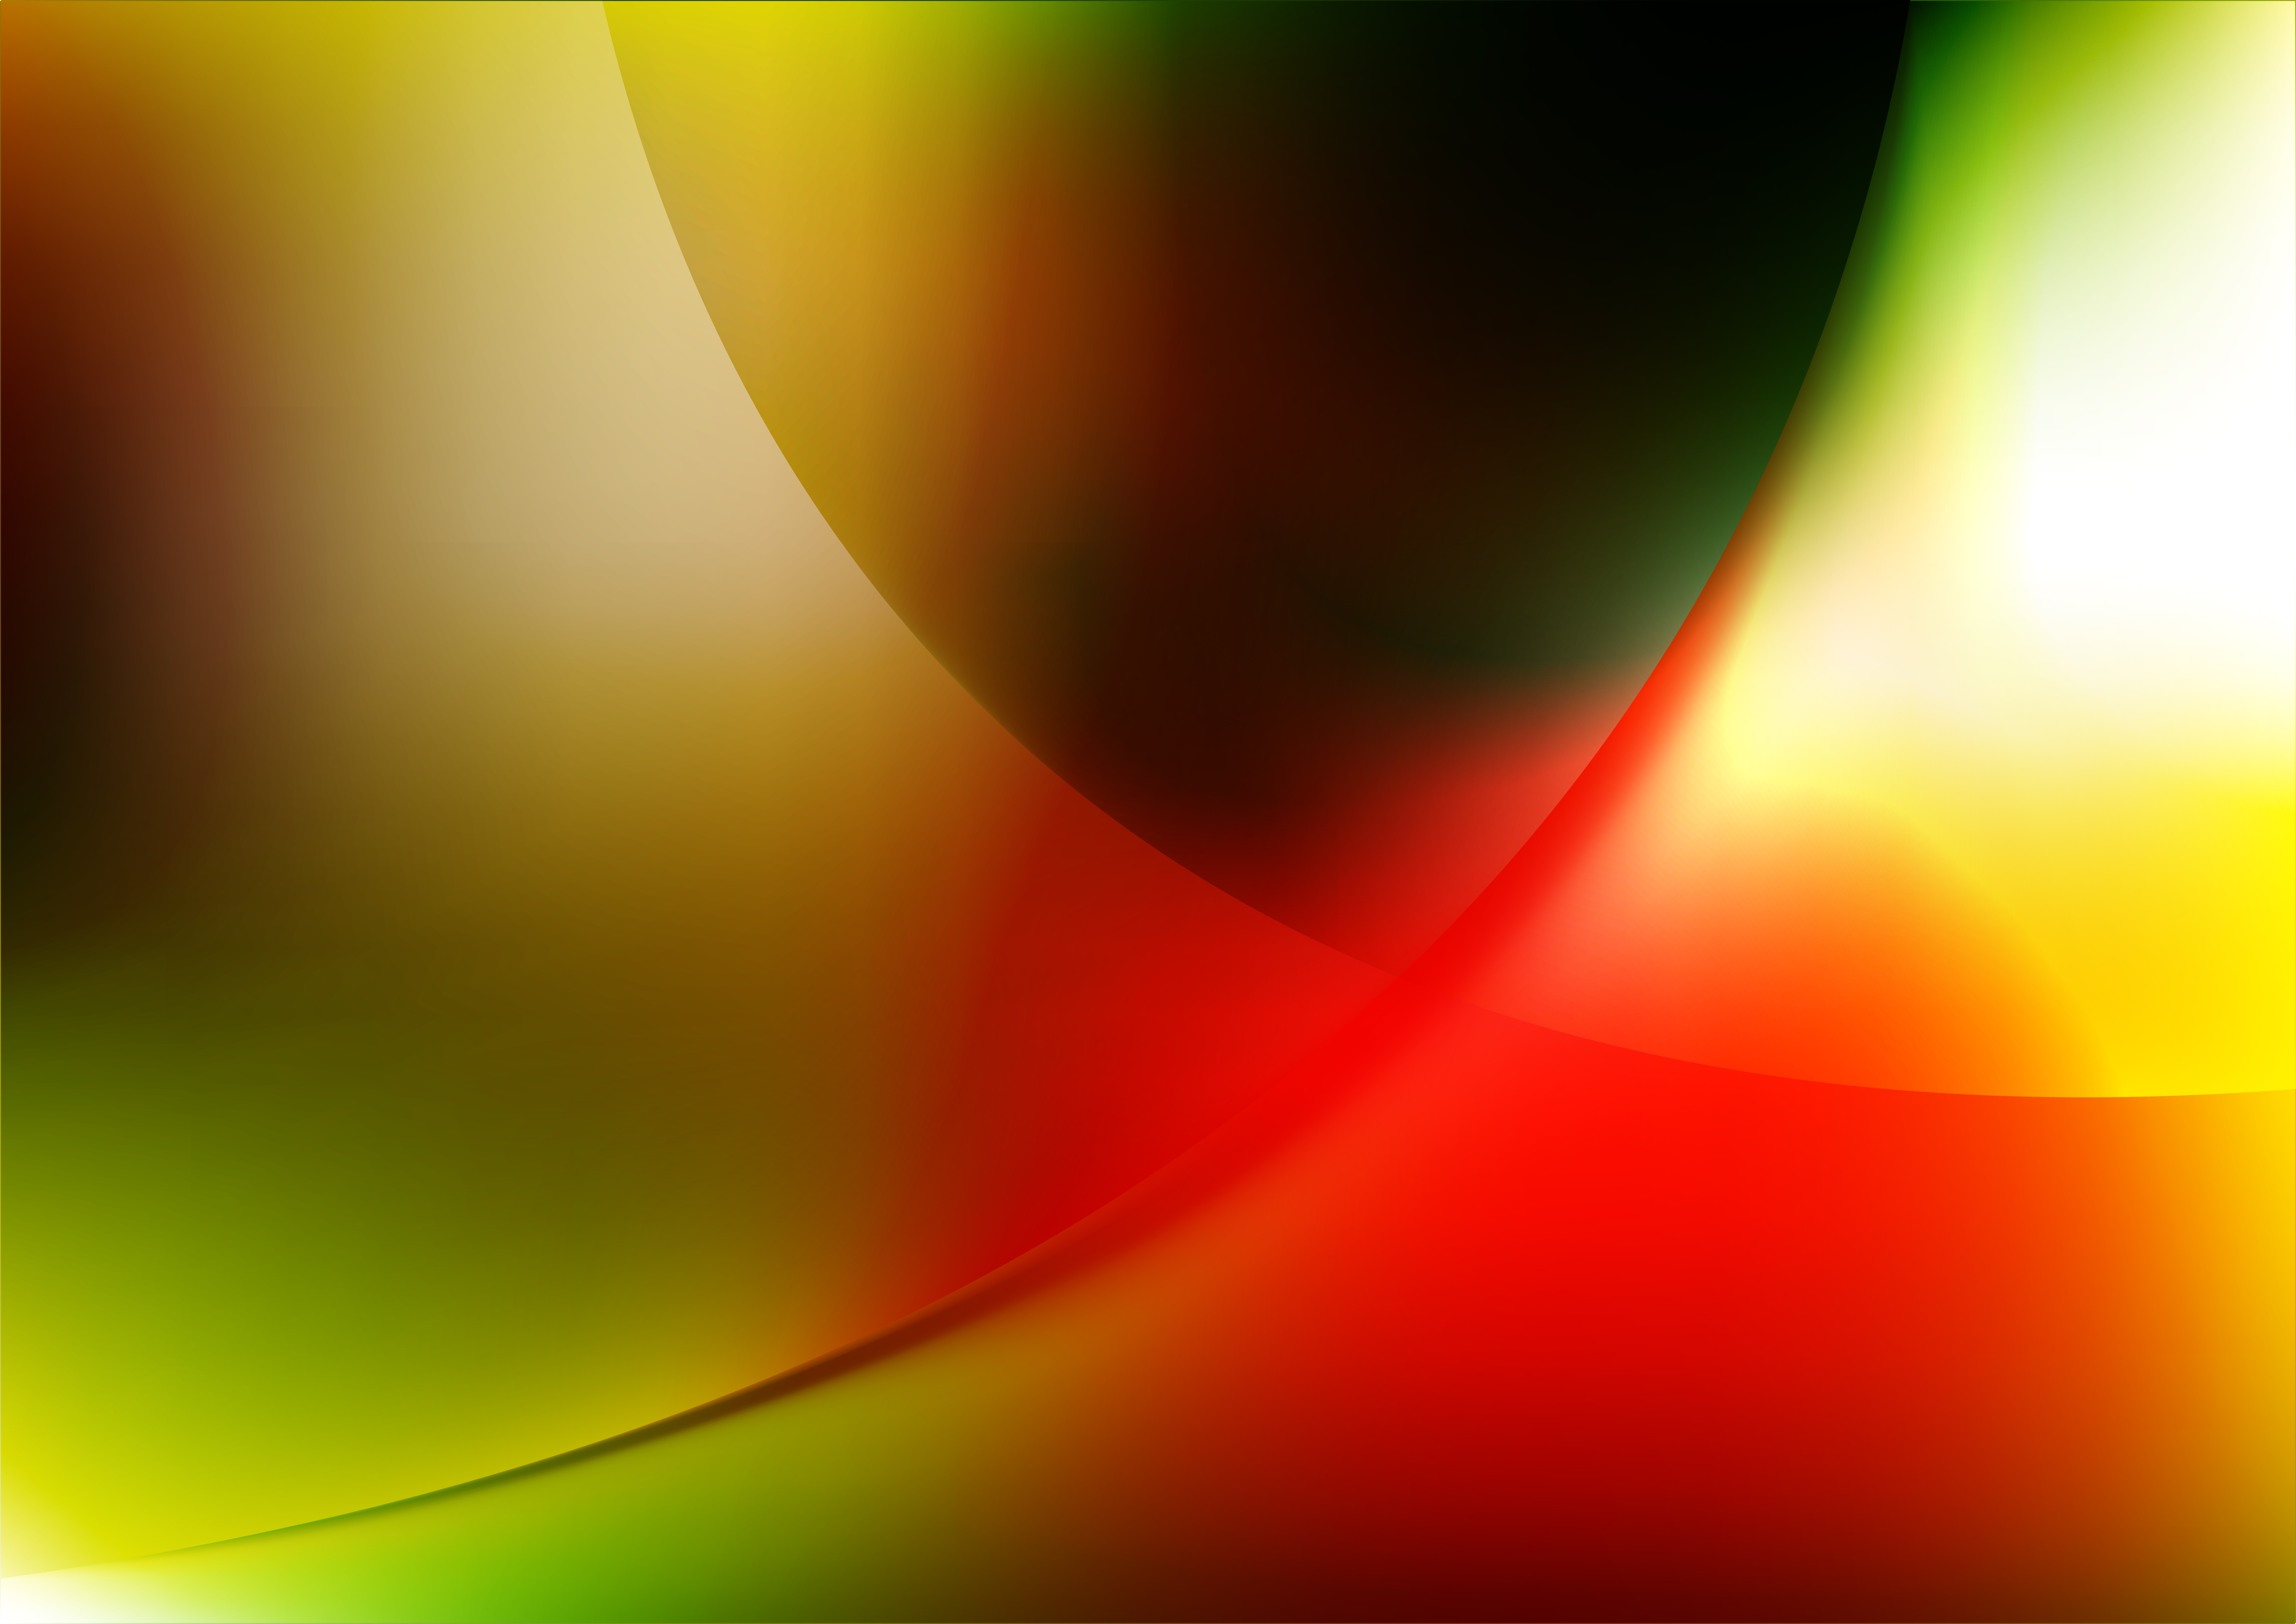 Free Red Yellow and Green Blurry Gradient Mesh Background Vector Image